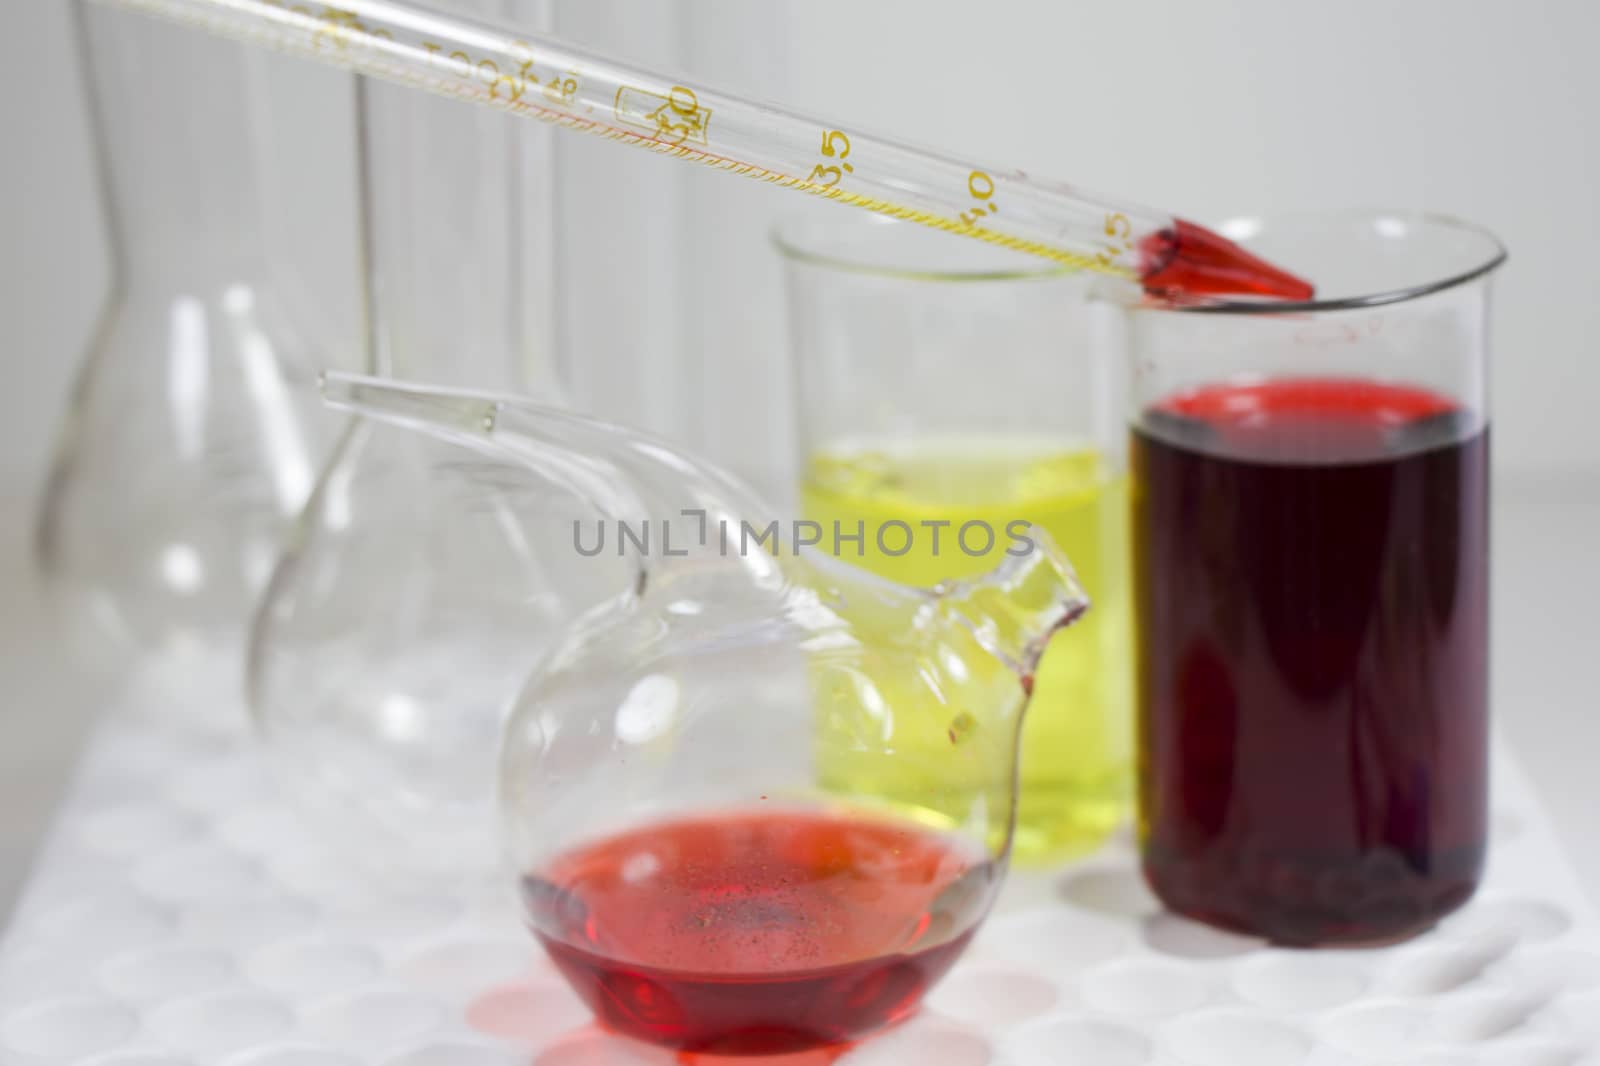 Laboratory chemical liquid elements and research diagnoses, instruments and objects in the sterile table, glassware and pipette. Studio shoot.